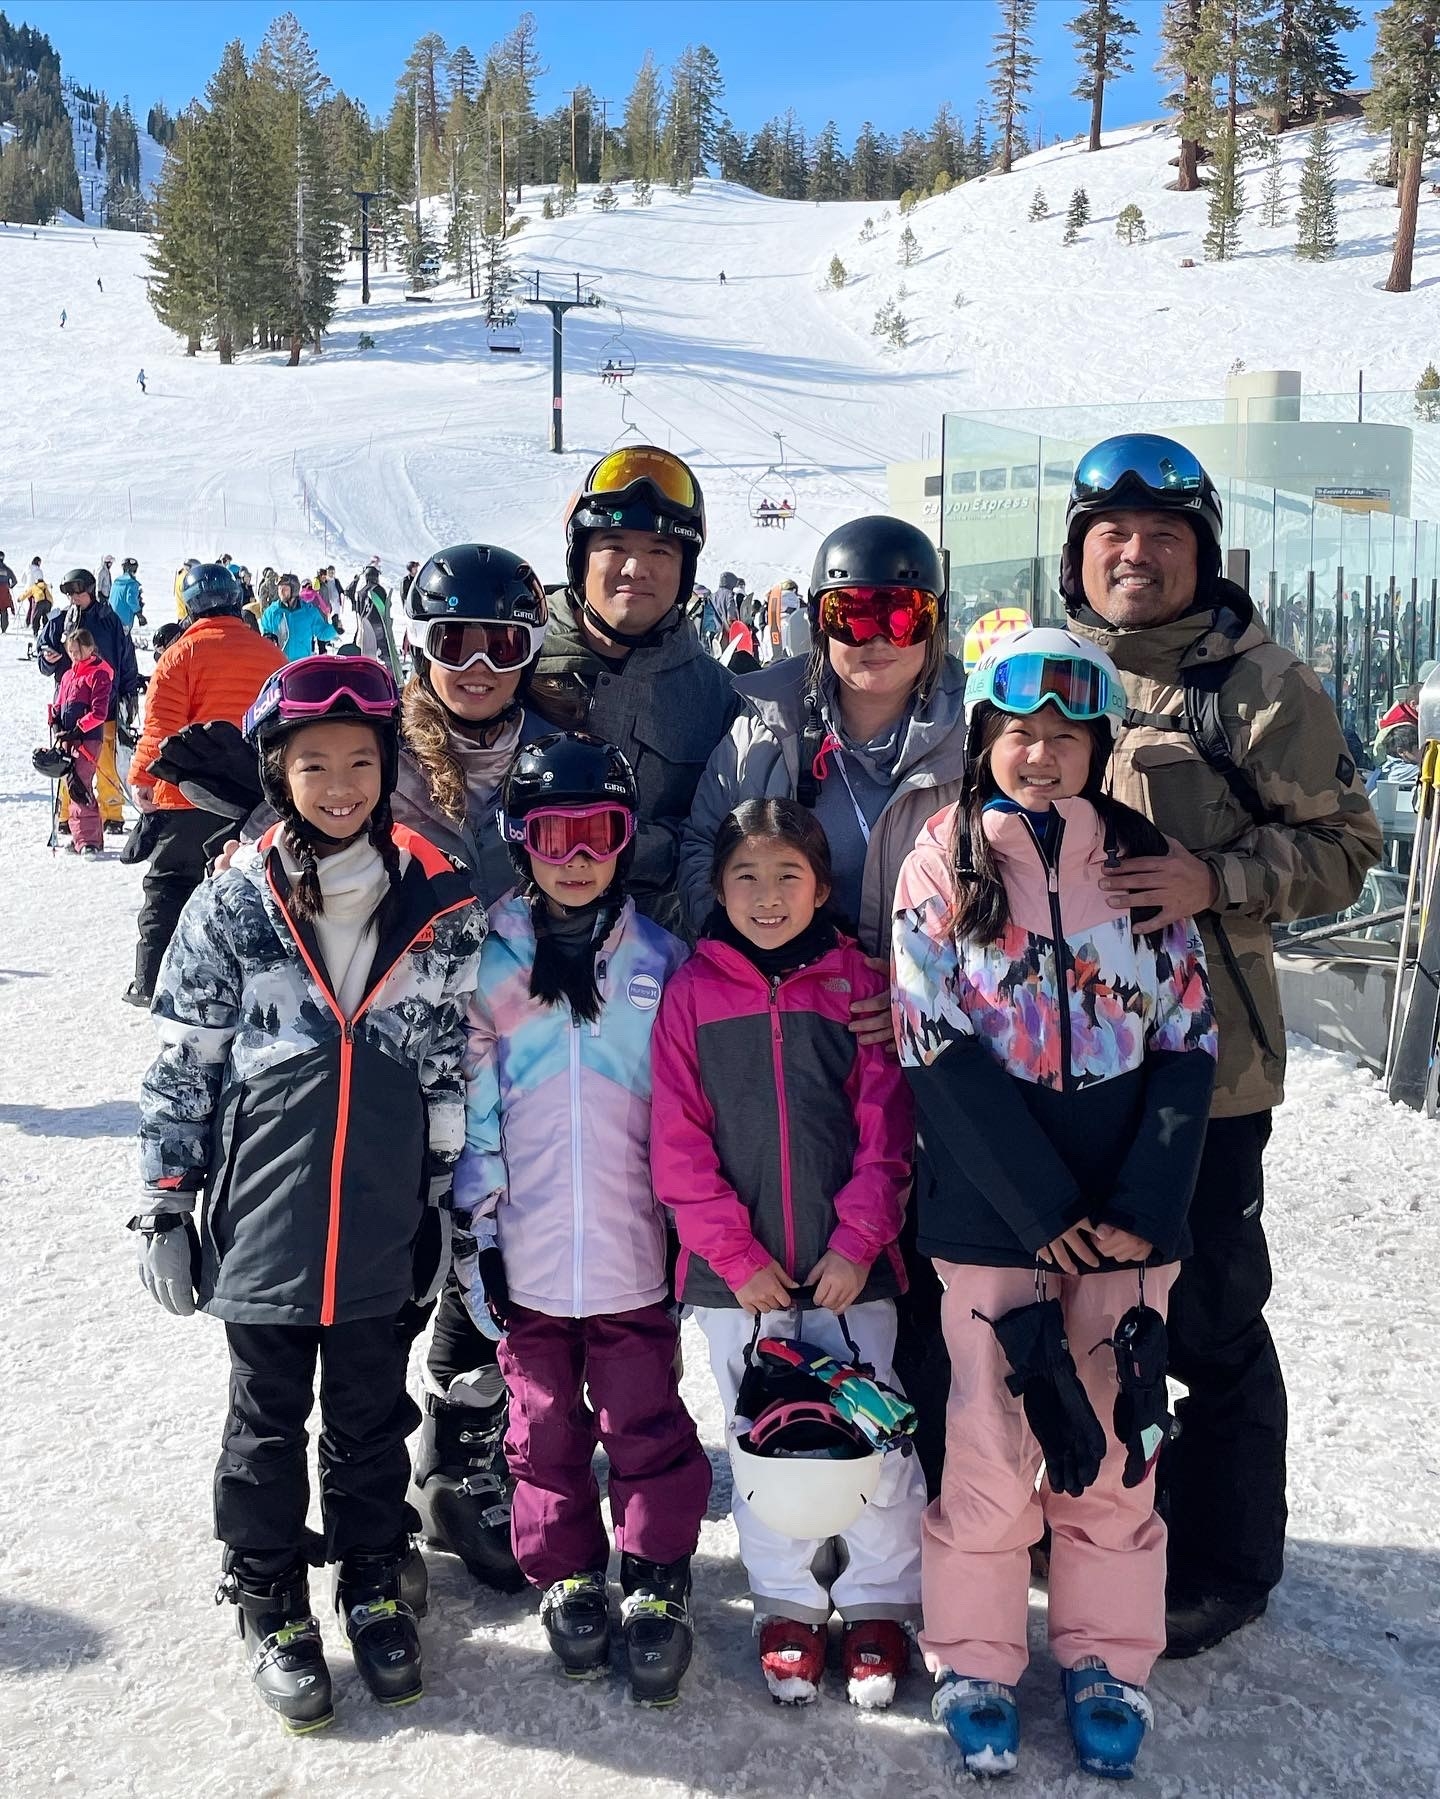 Family in ski gear on hill